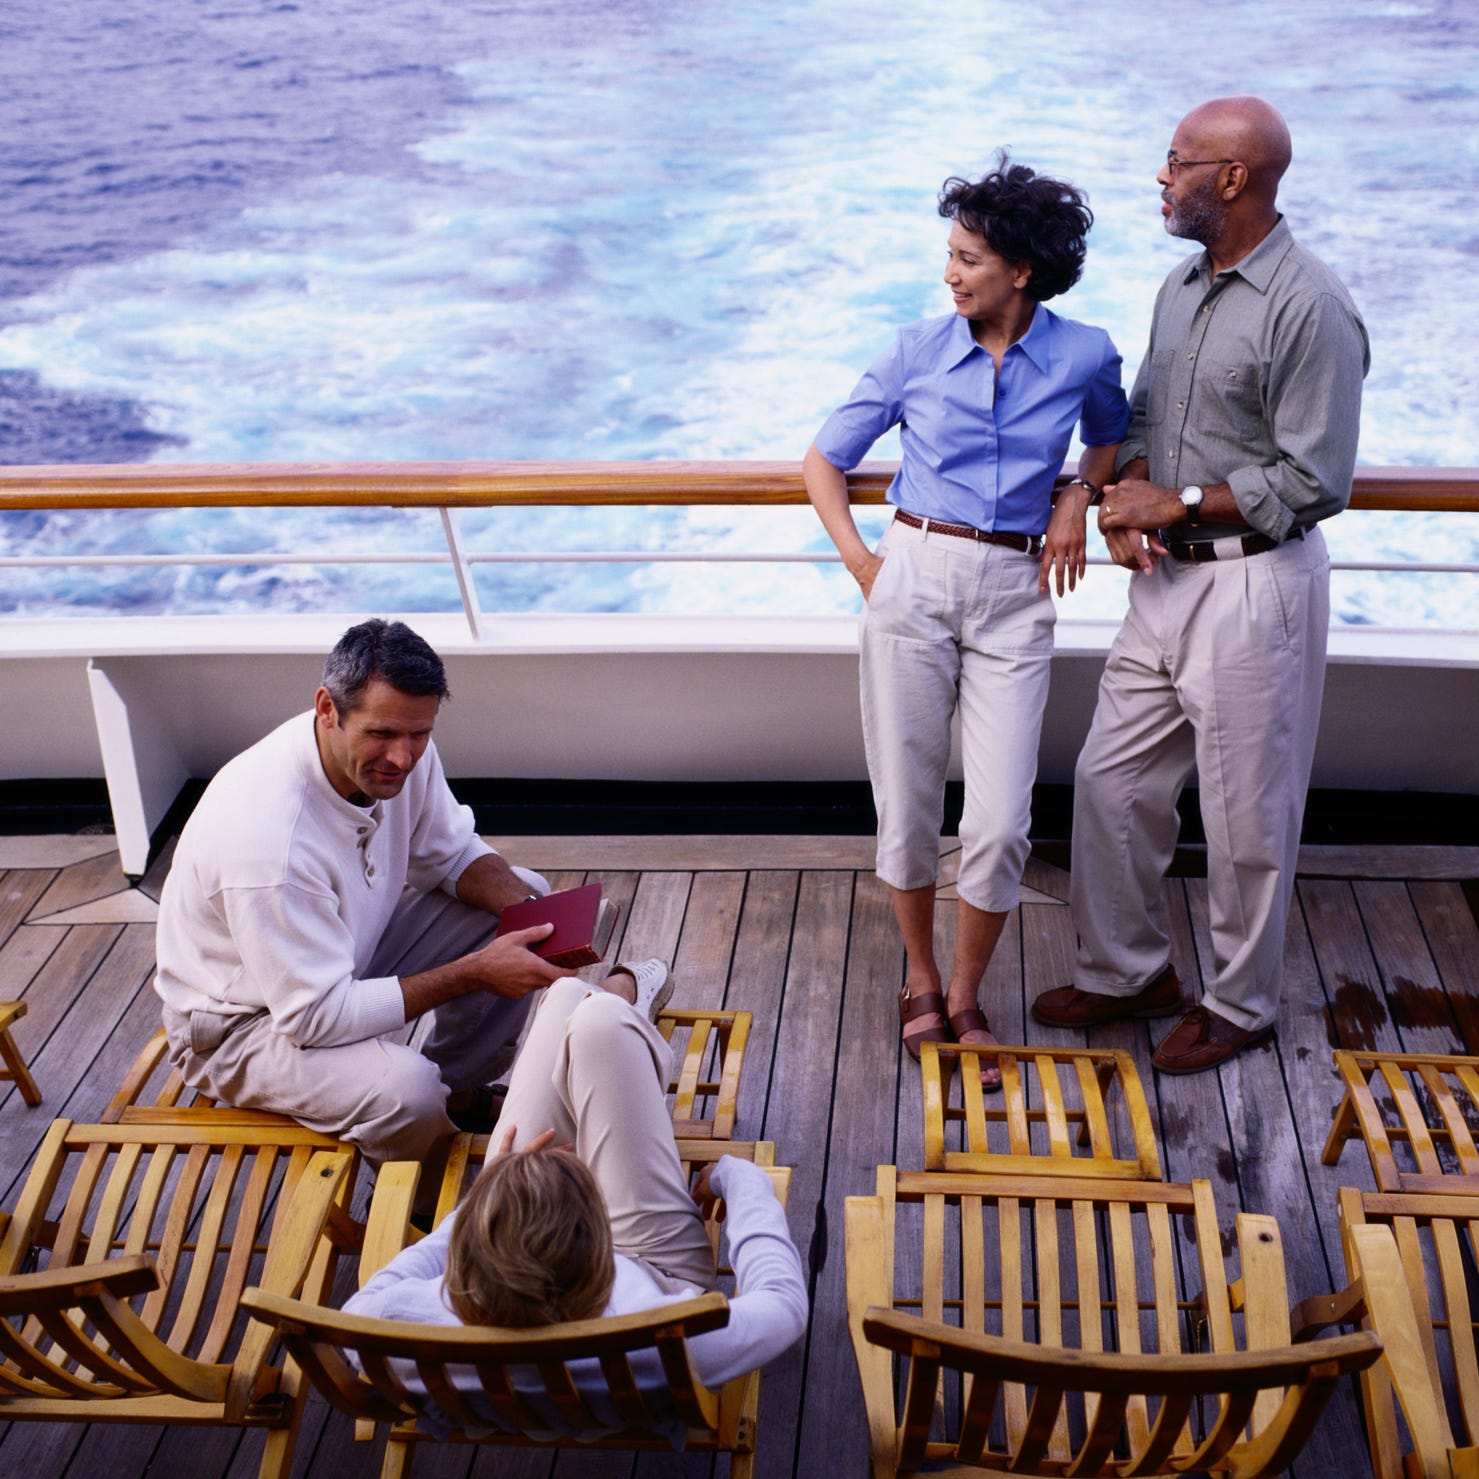 Couples on deck of cruise ship.